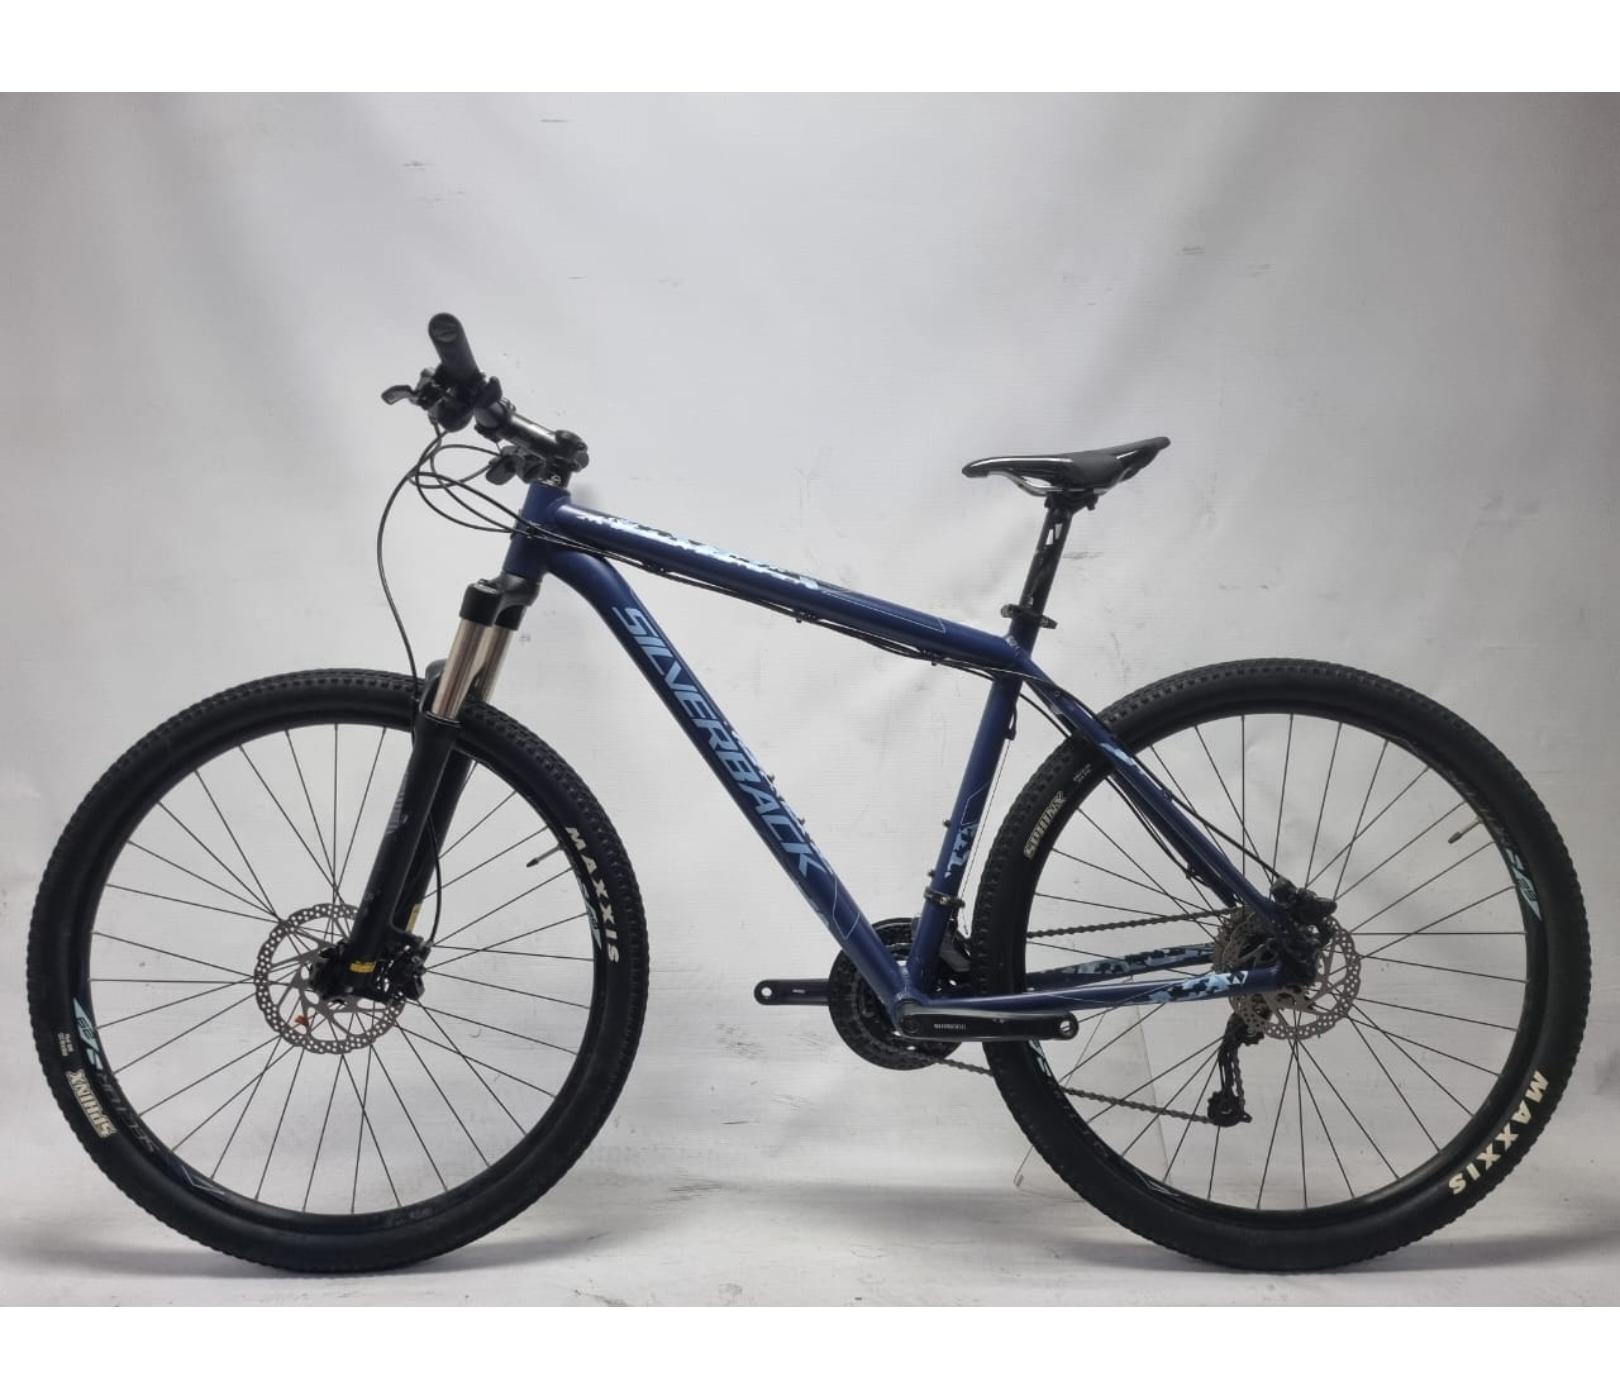 Pre-Owned Silverback Spectra Aluminium Hardtail MTB - Large